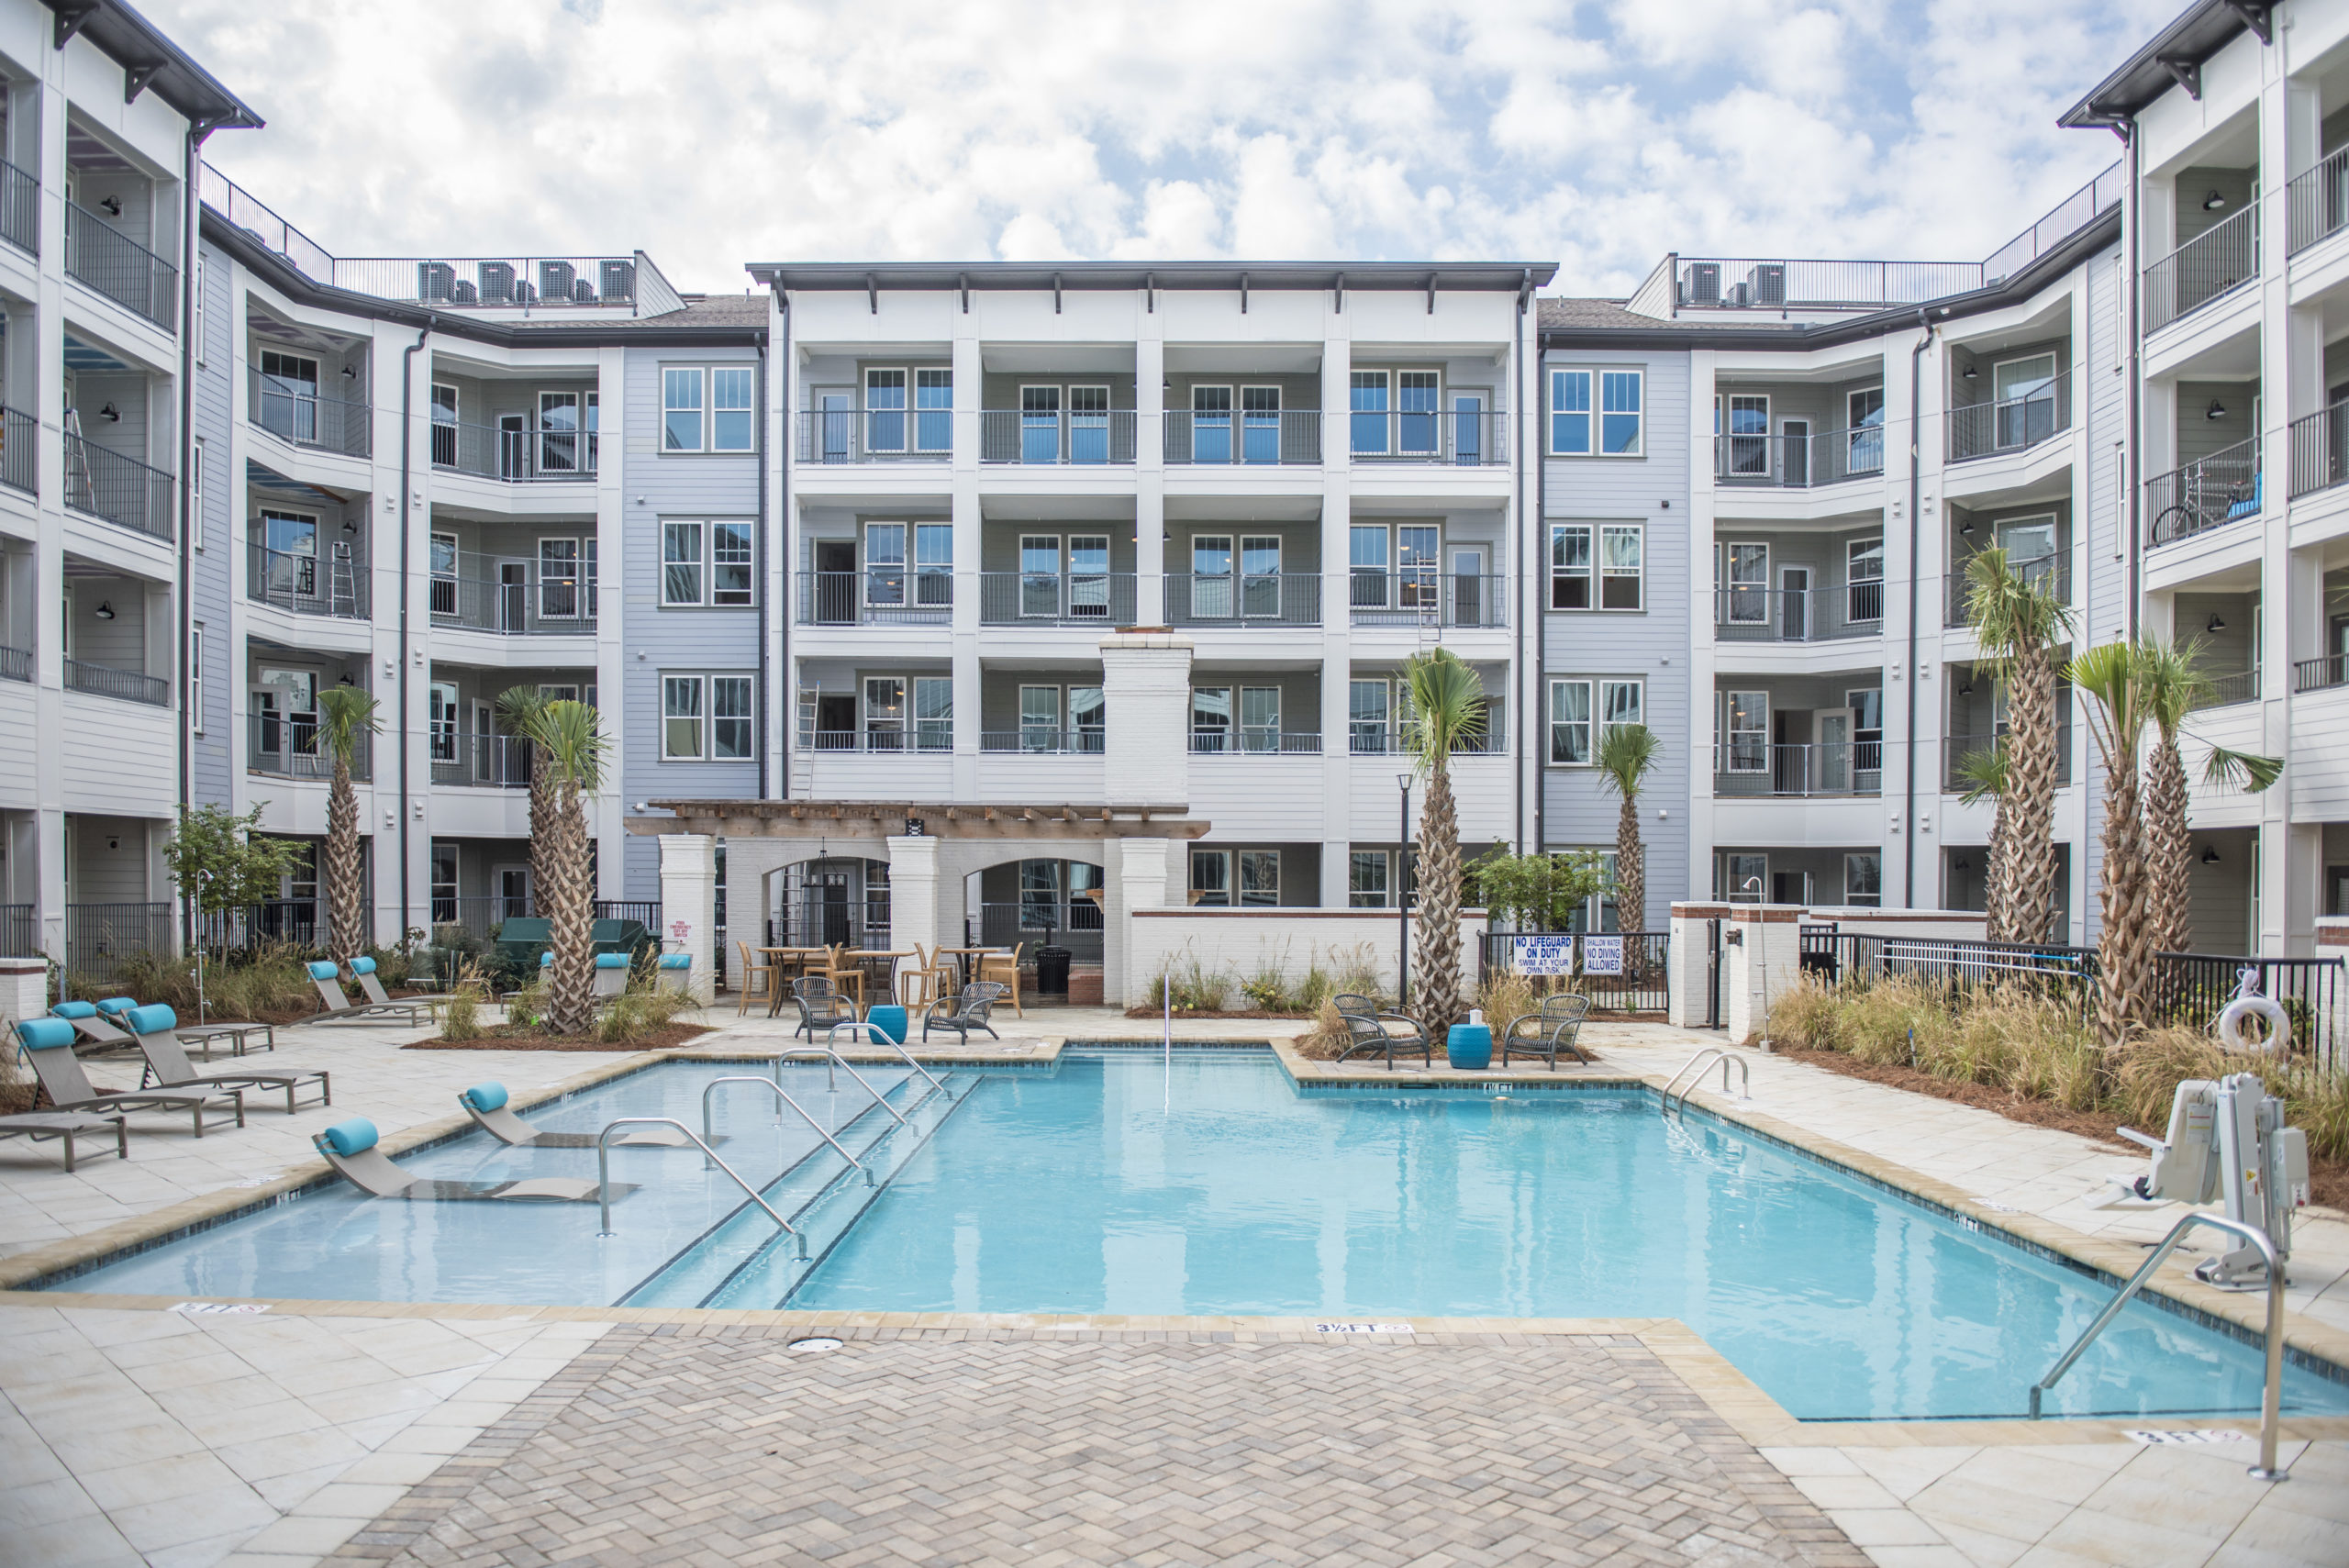 Ironwood – North Augusta, SC - Pool and Exterior Building